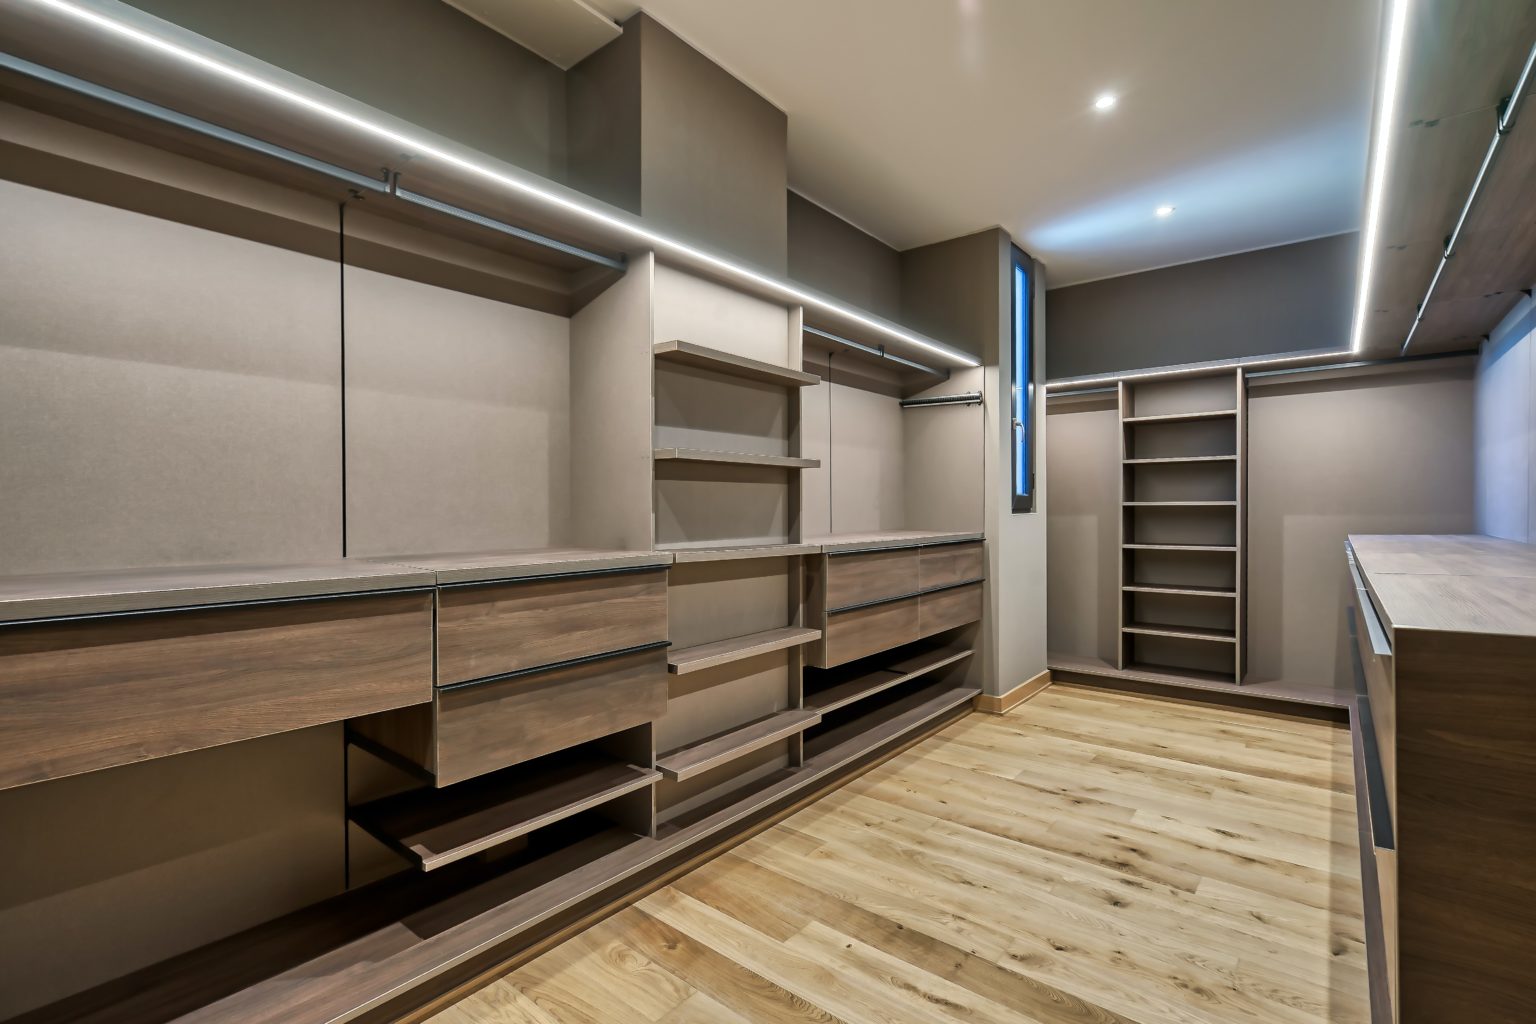 Custom closet made from wood and other materials. Space designed for him and her with places for many different personal items.